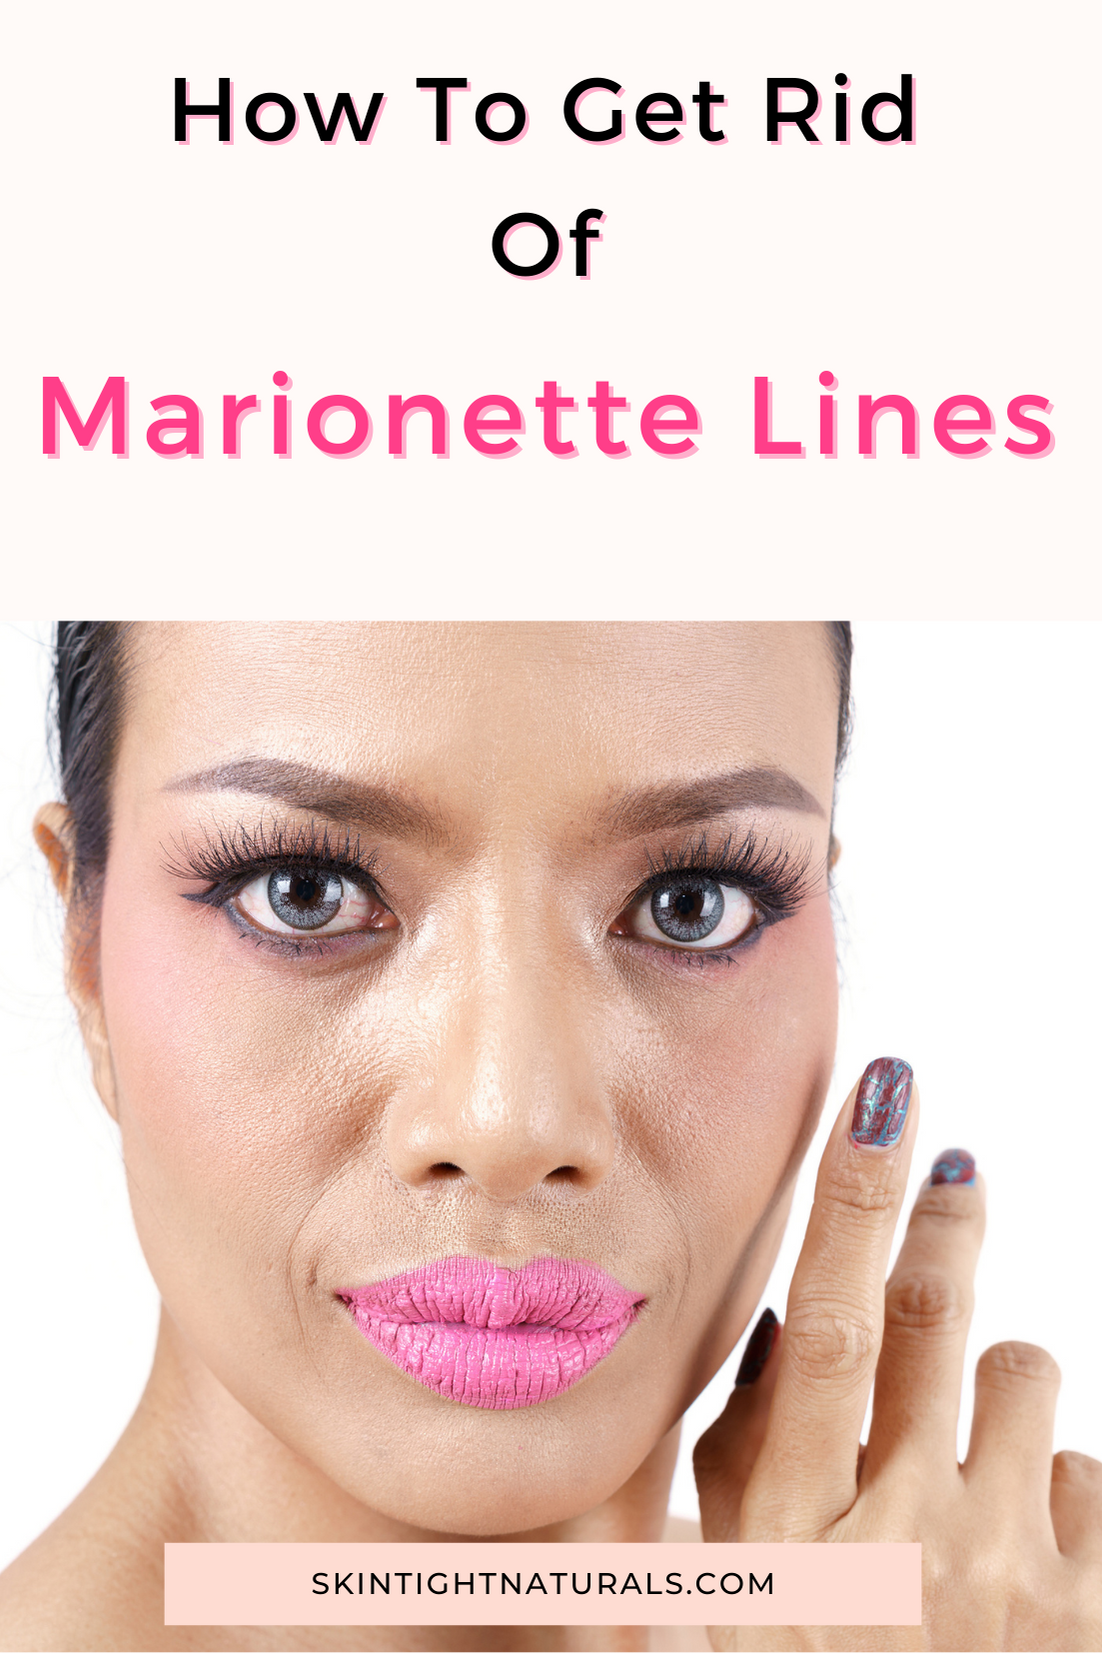 How To Get Rid Of Marionette Lines